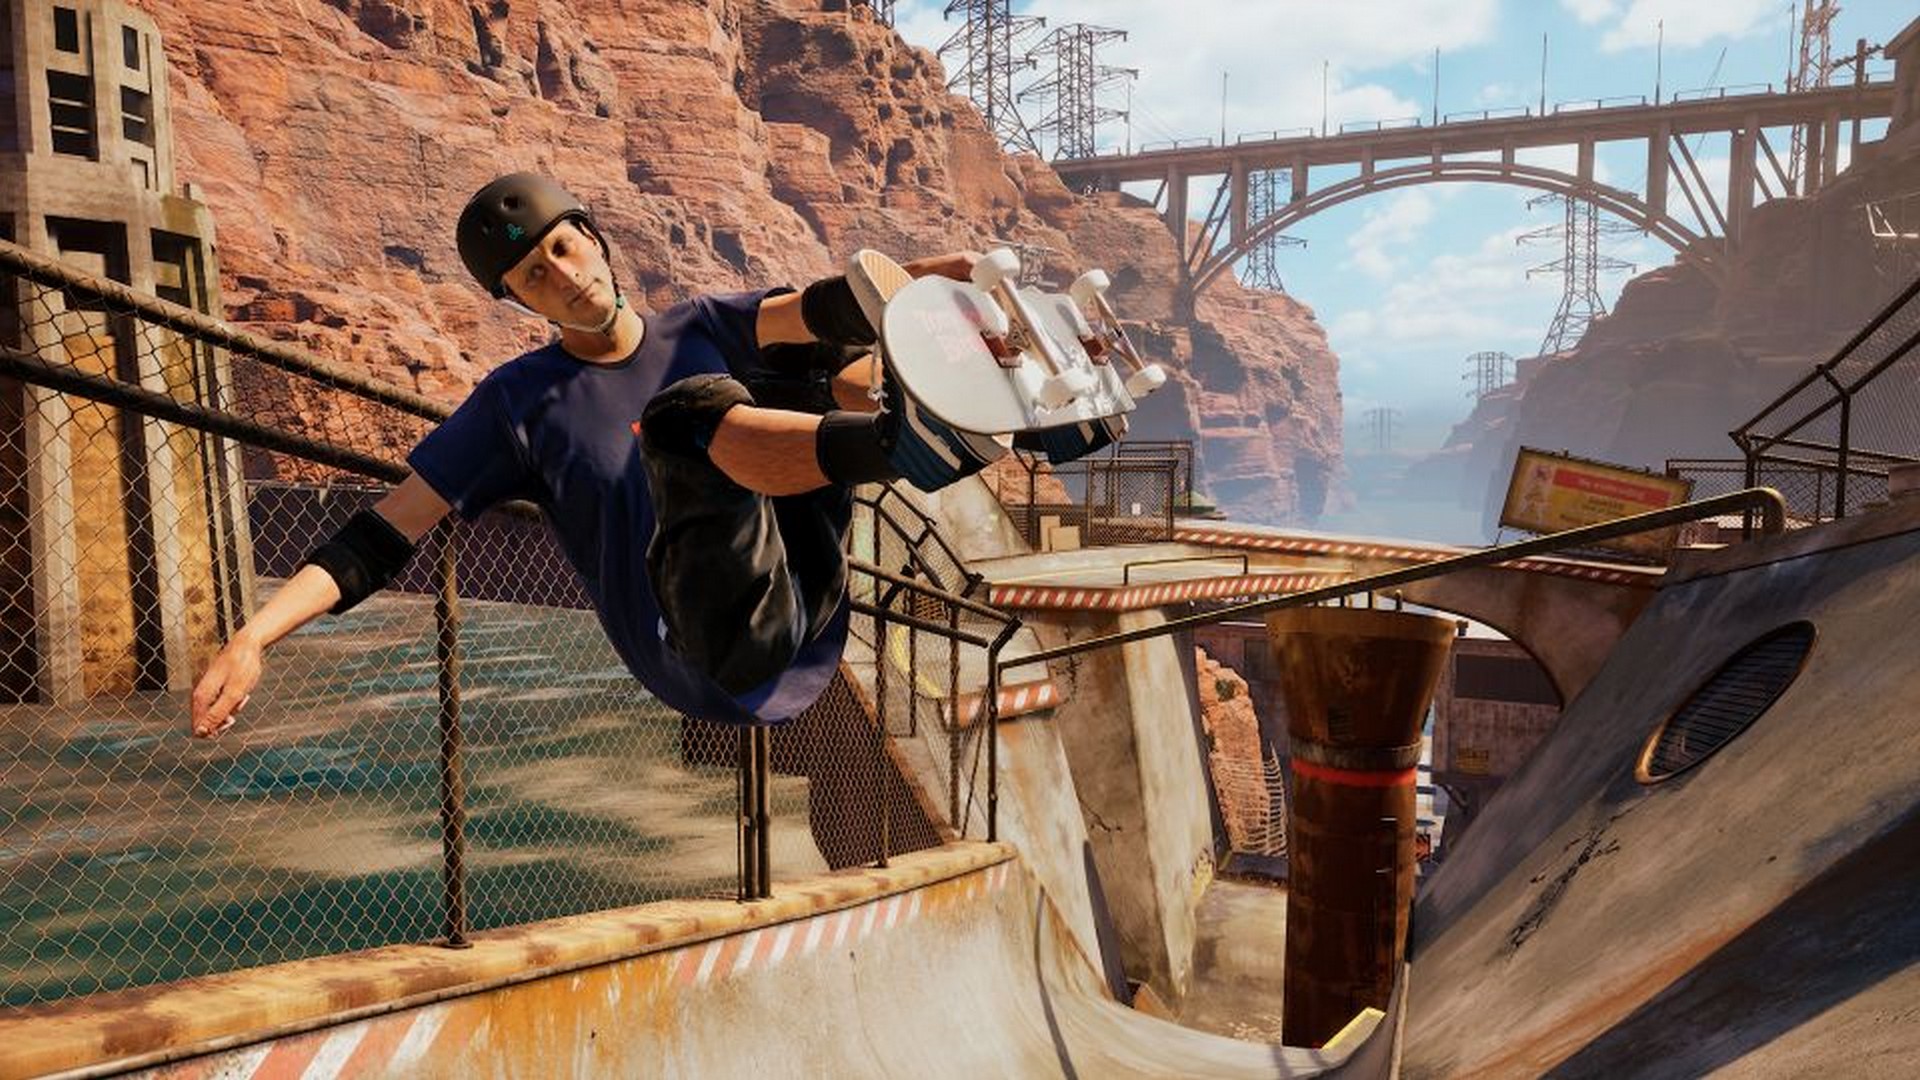 Tony Hawk’s Pro Skater 1 And 2 Flips Into Ultra-HD, Available Now For Next-Gen Consoles